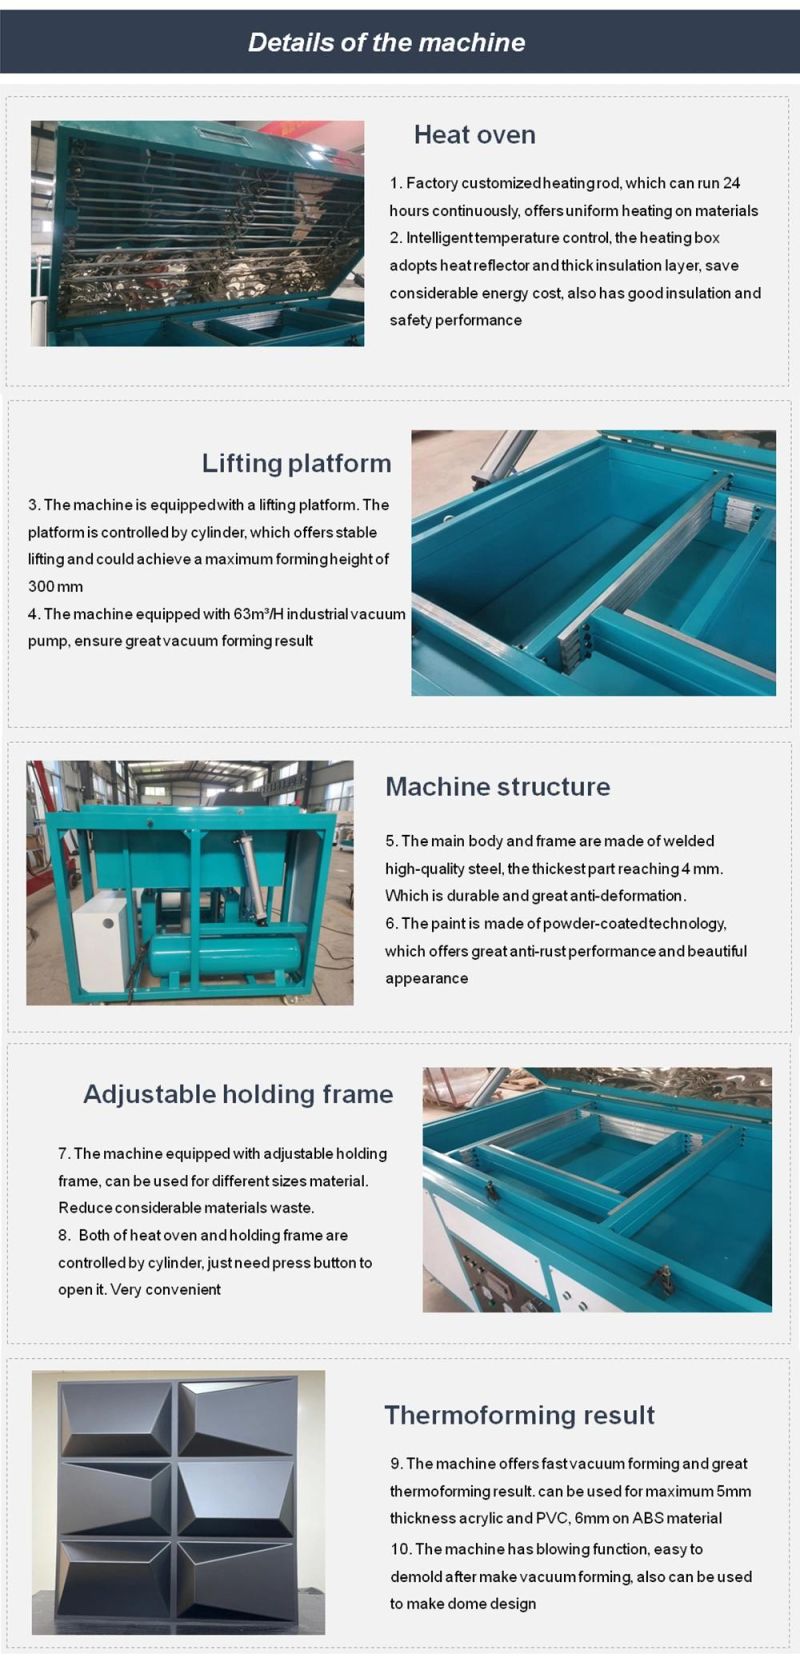 Best Selling Plastic Vacuum Forming Machine for Sale Manufacturer Directly Supply